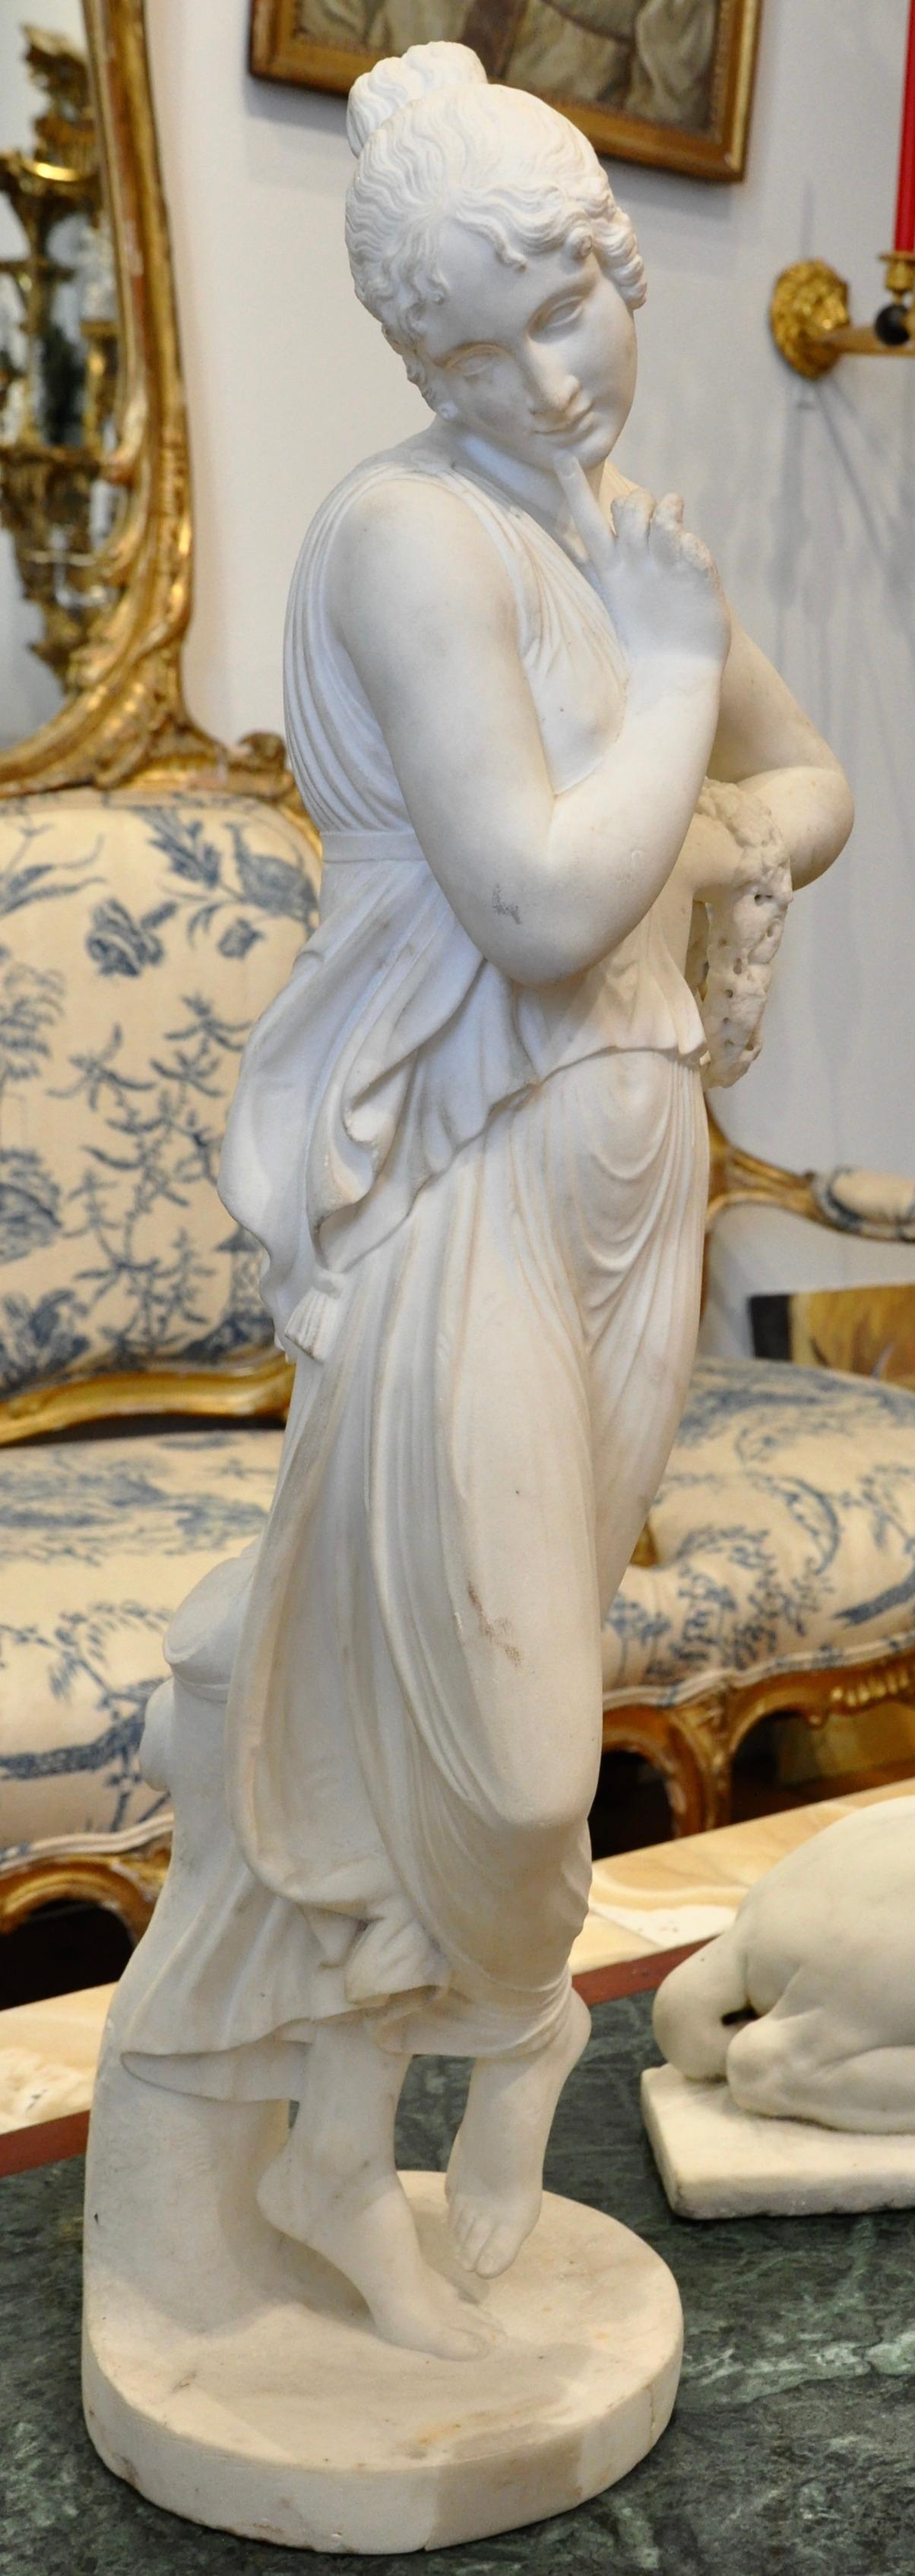 19th Century Neoclassical Carved Marble Statue of Canova's Dancing Woman 1